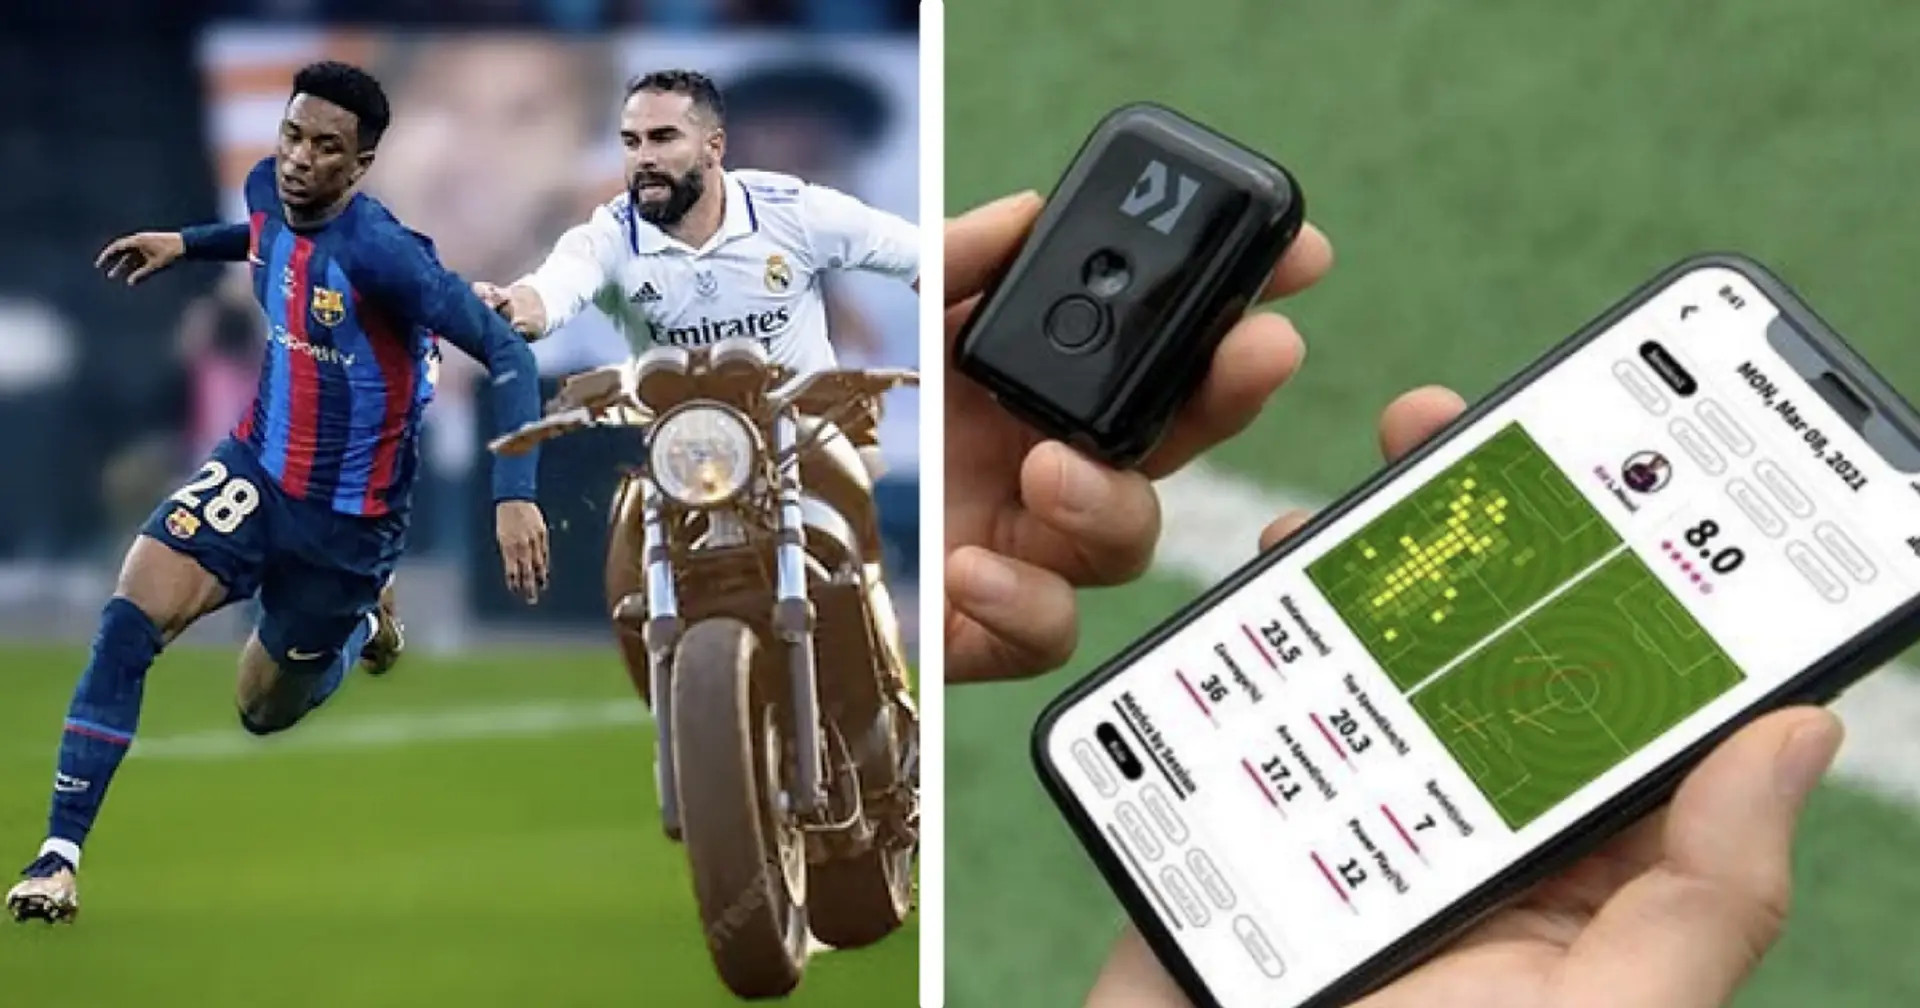 5 fastest Barca players as revealed by GPS trackers